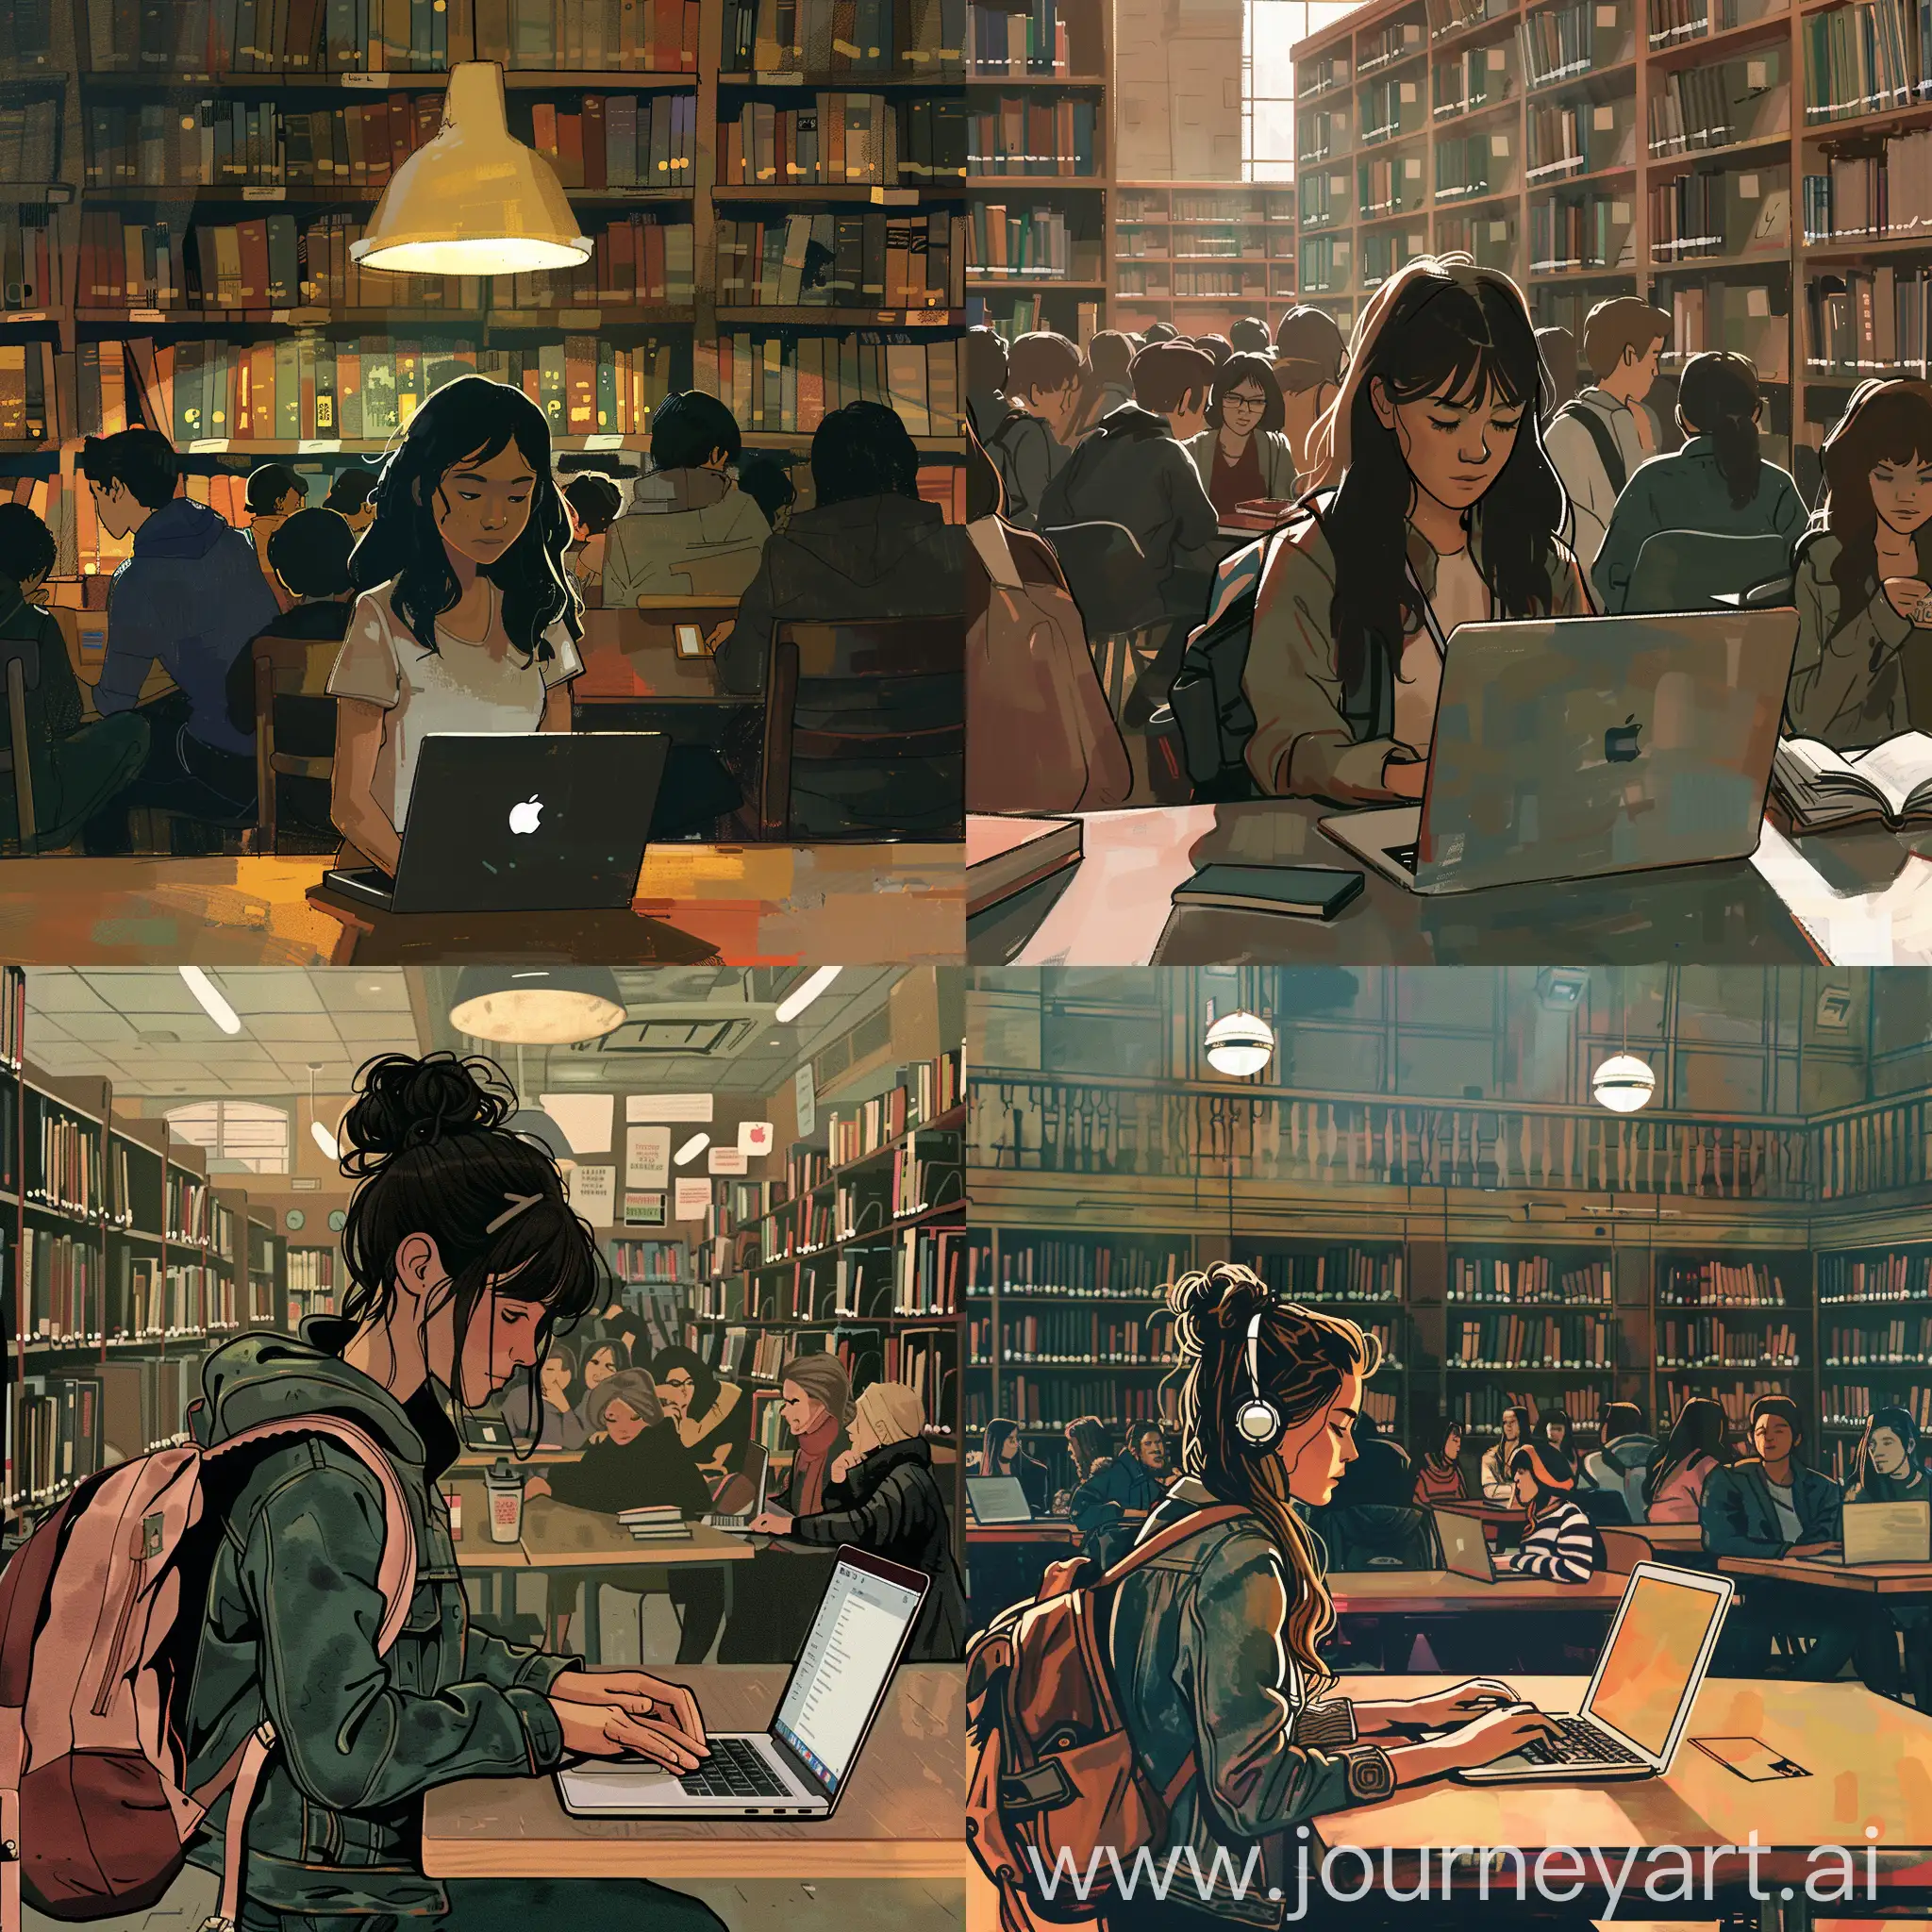 Create a image of a girl using her macbook sitting in a crowded library